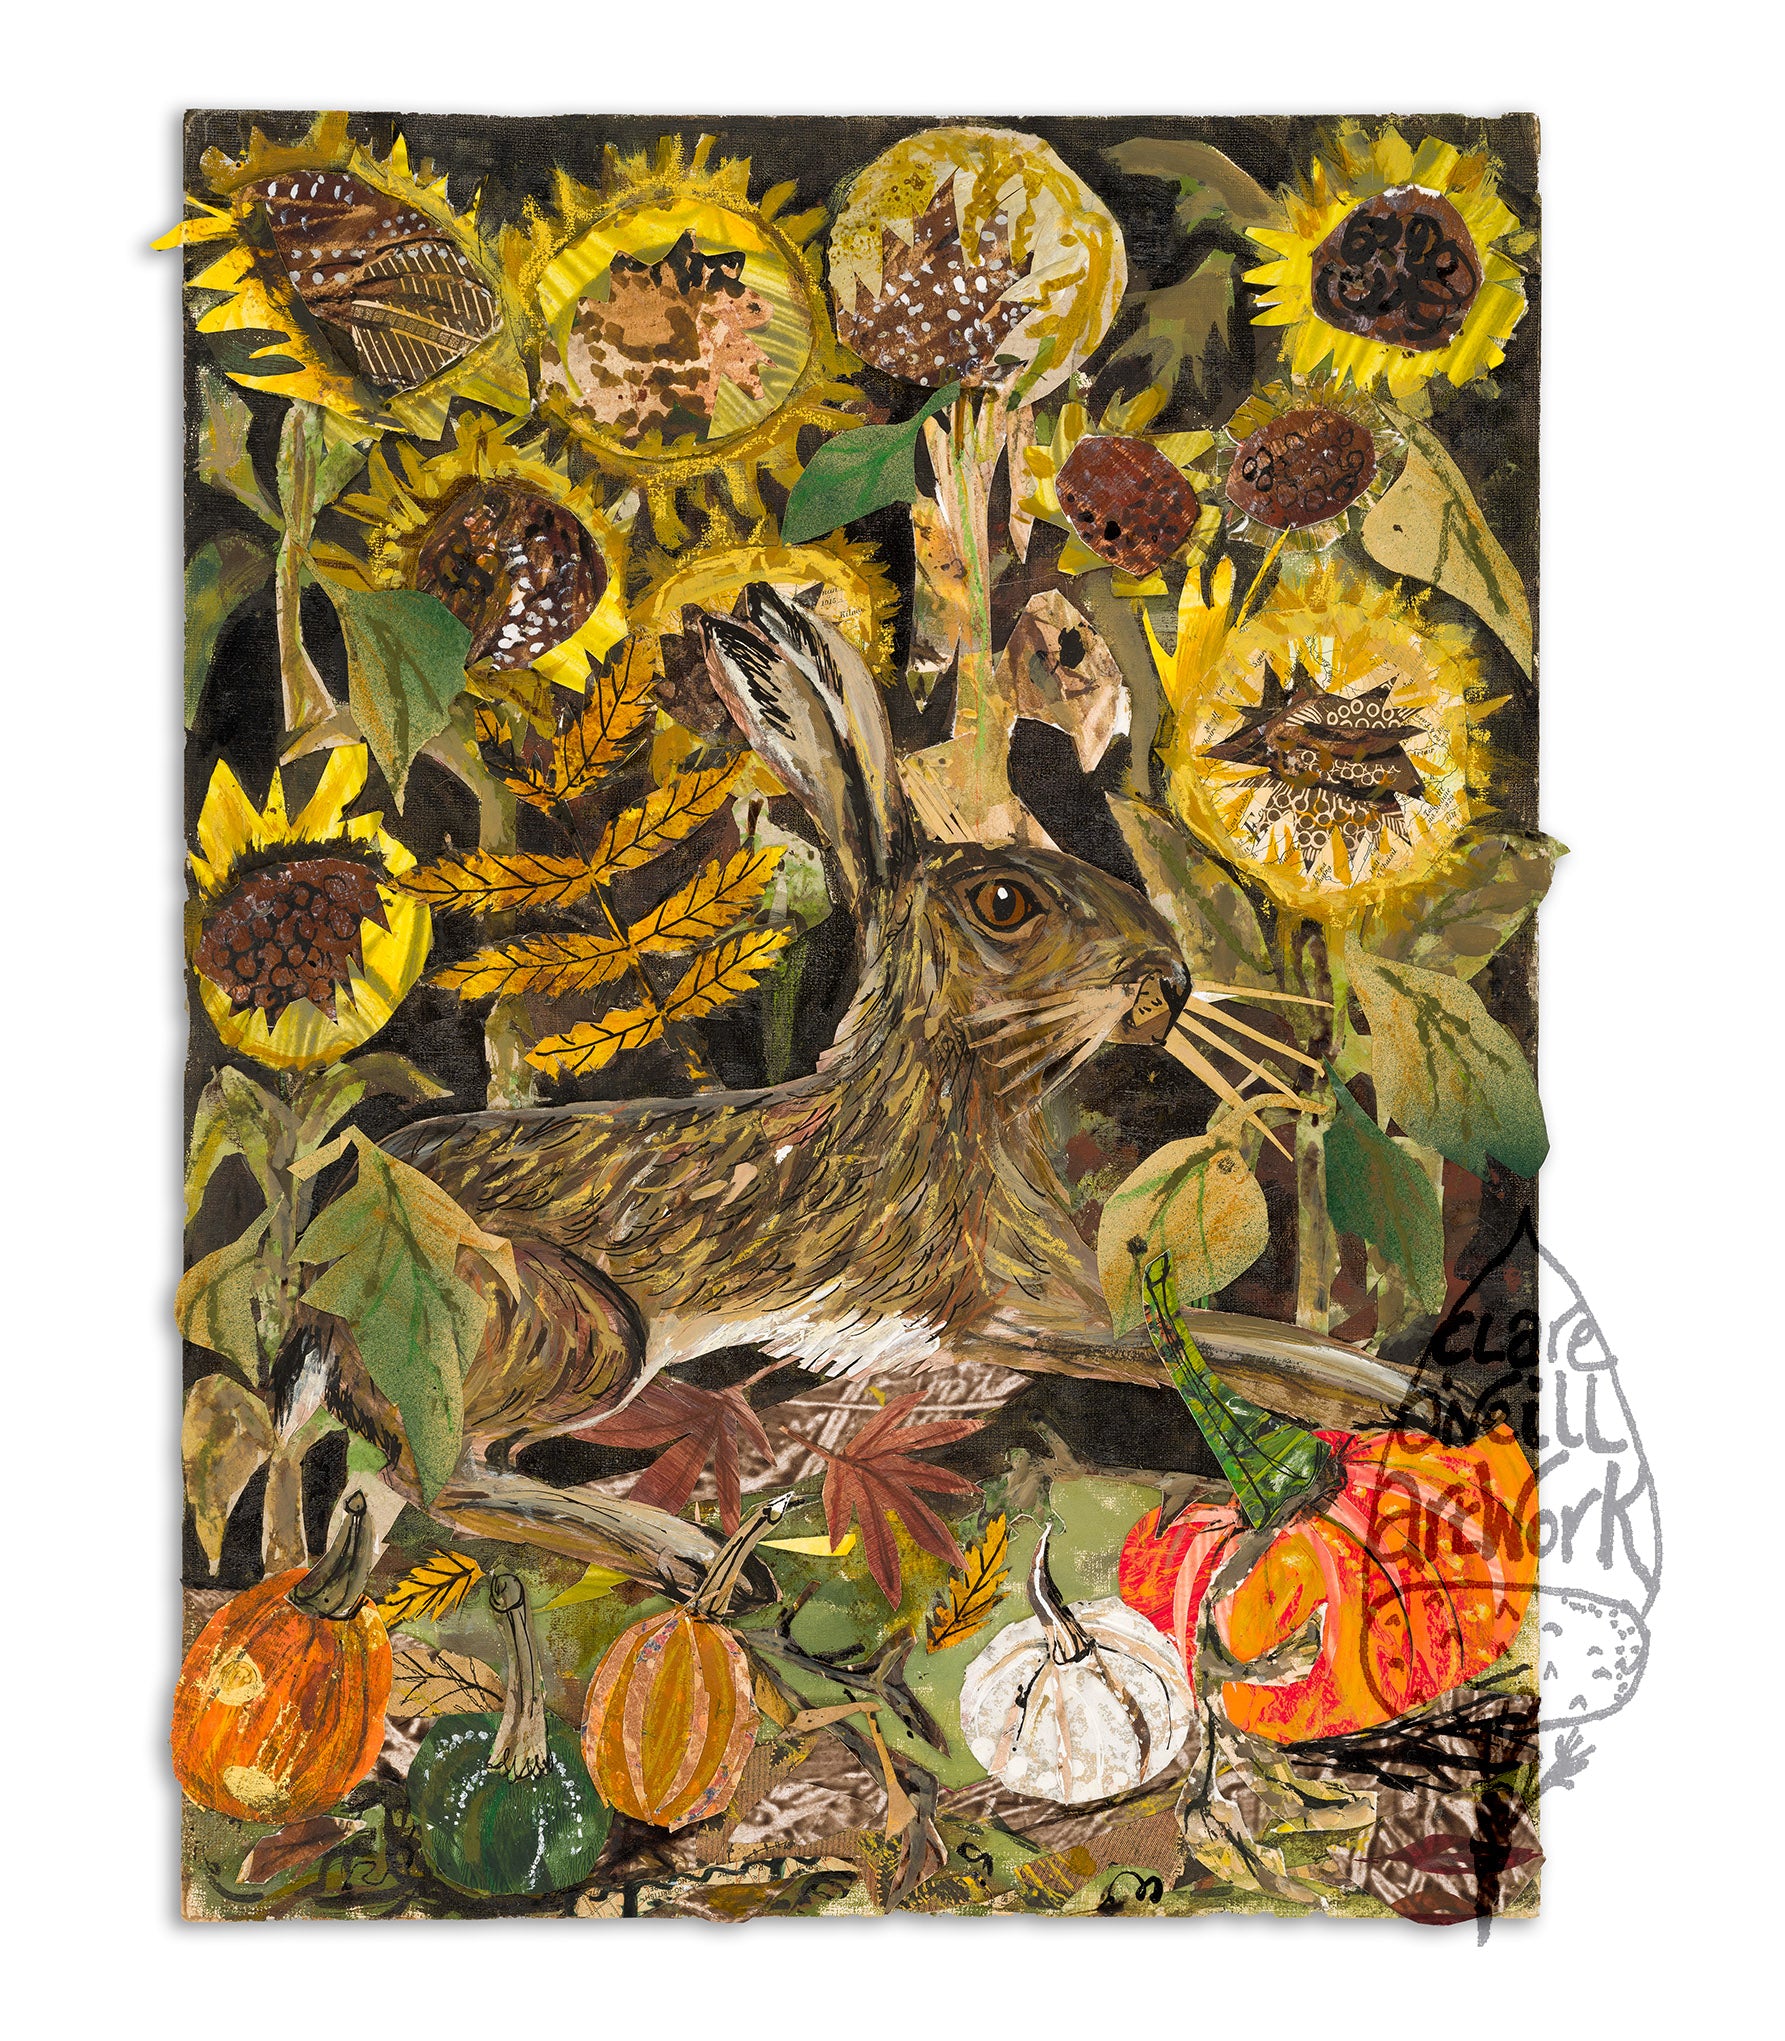 Hare in the Sunflowers- Original Mixed Media Framed Painting.